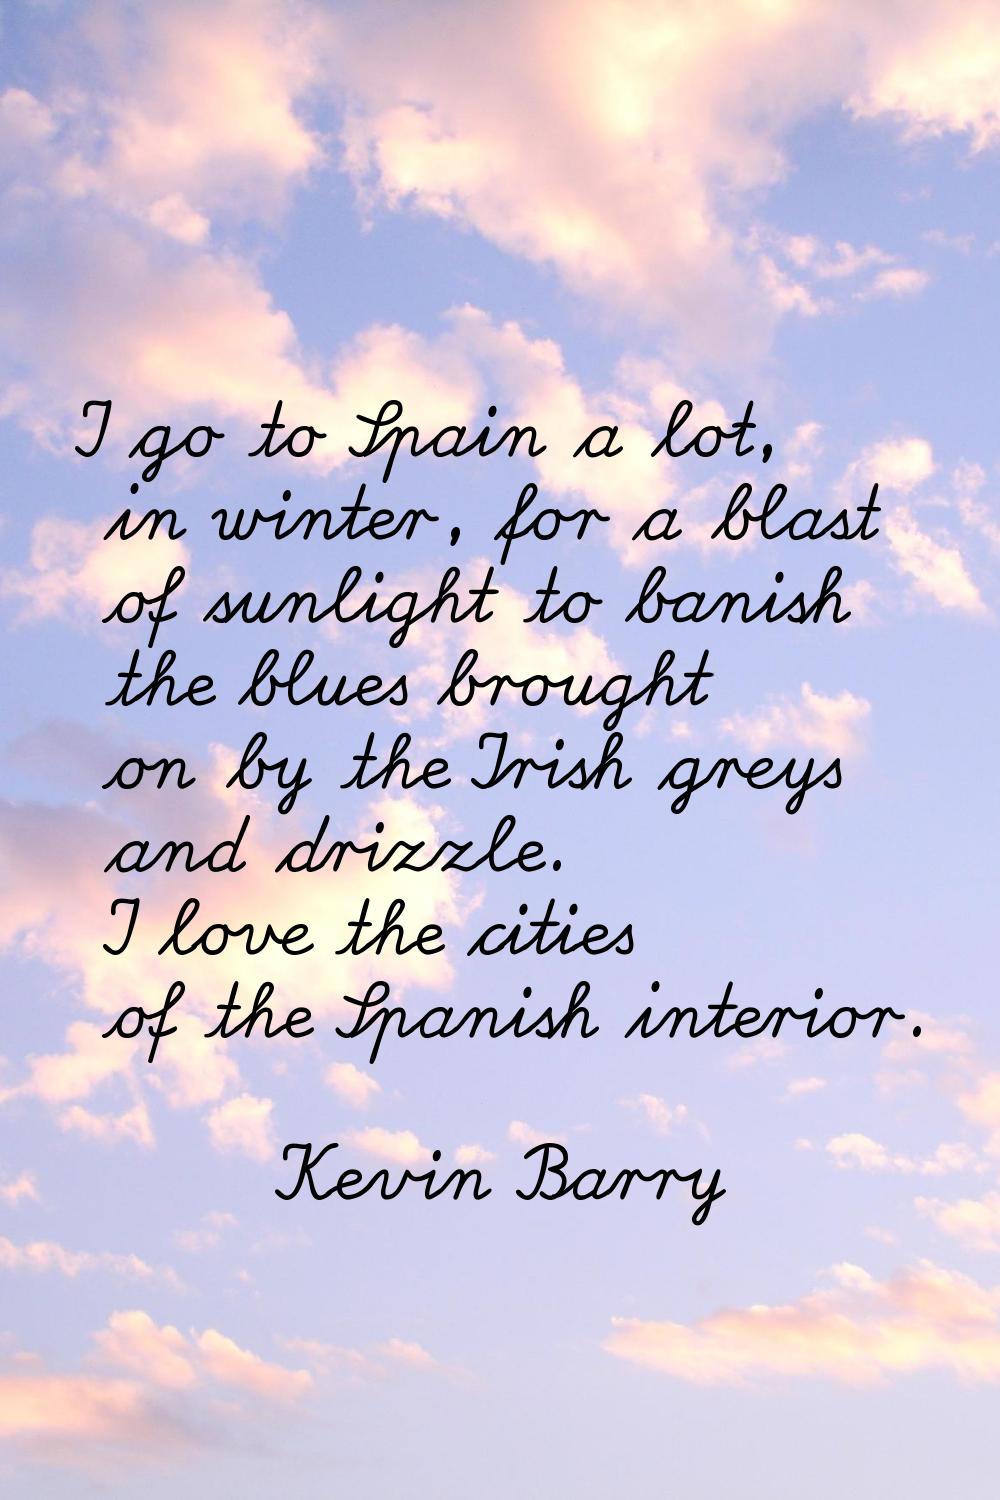 I go to Spain a lot, in winter, for a blast of sunlight to banish the blues brought on by the Irish